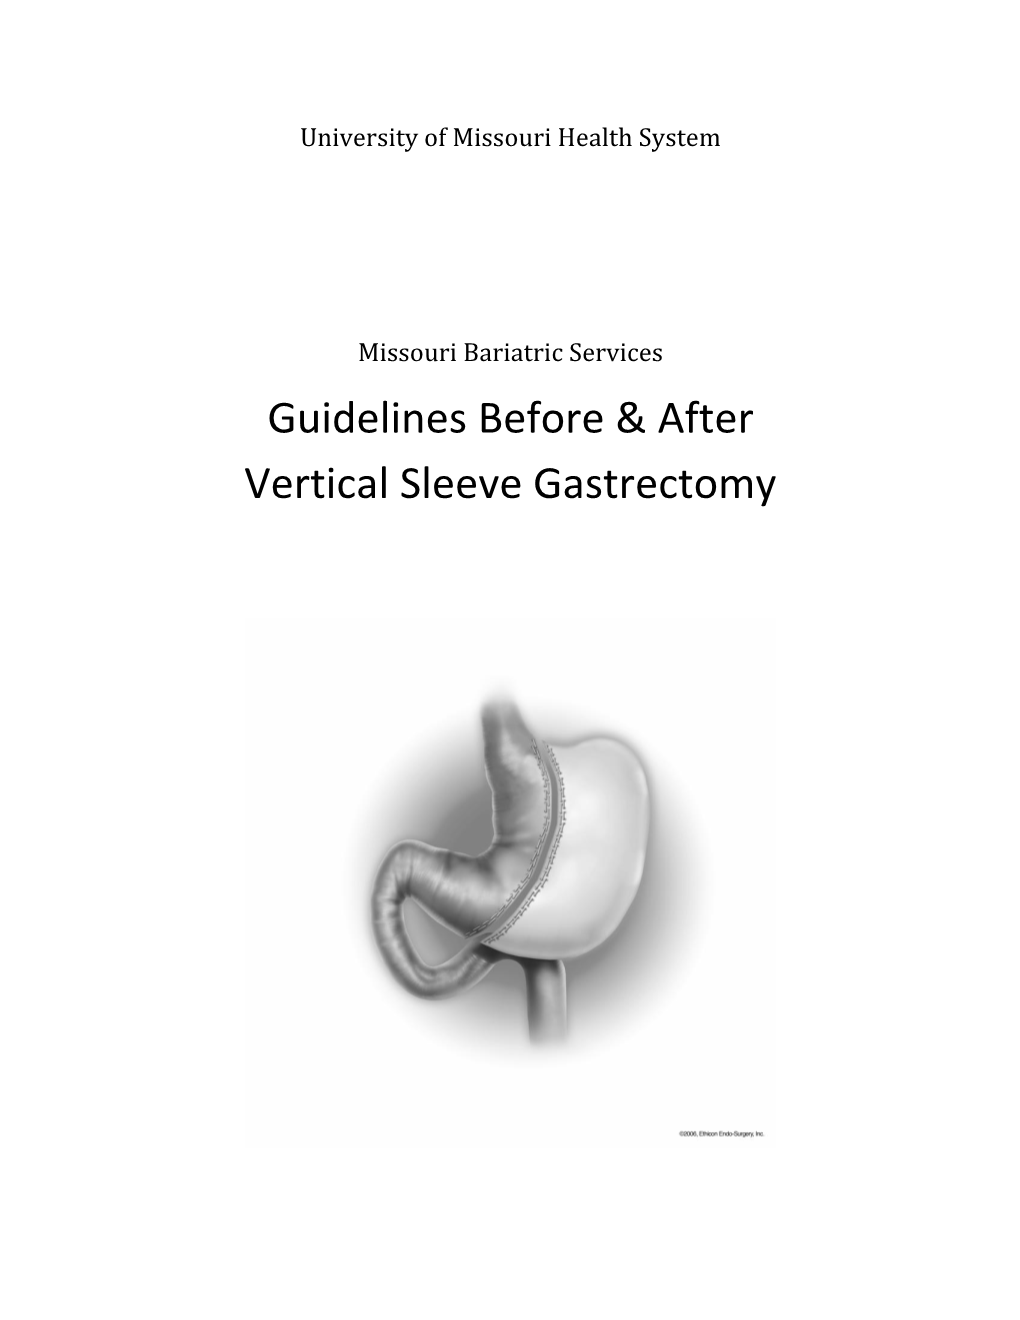 Guidelines Before & After Vertical Sleeve Gastrectomy